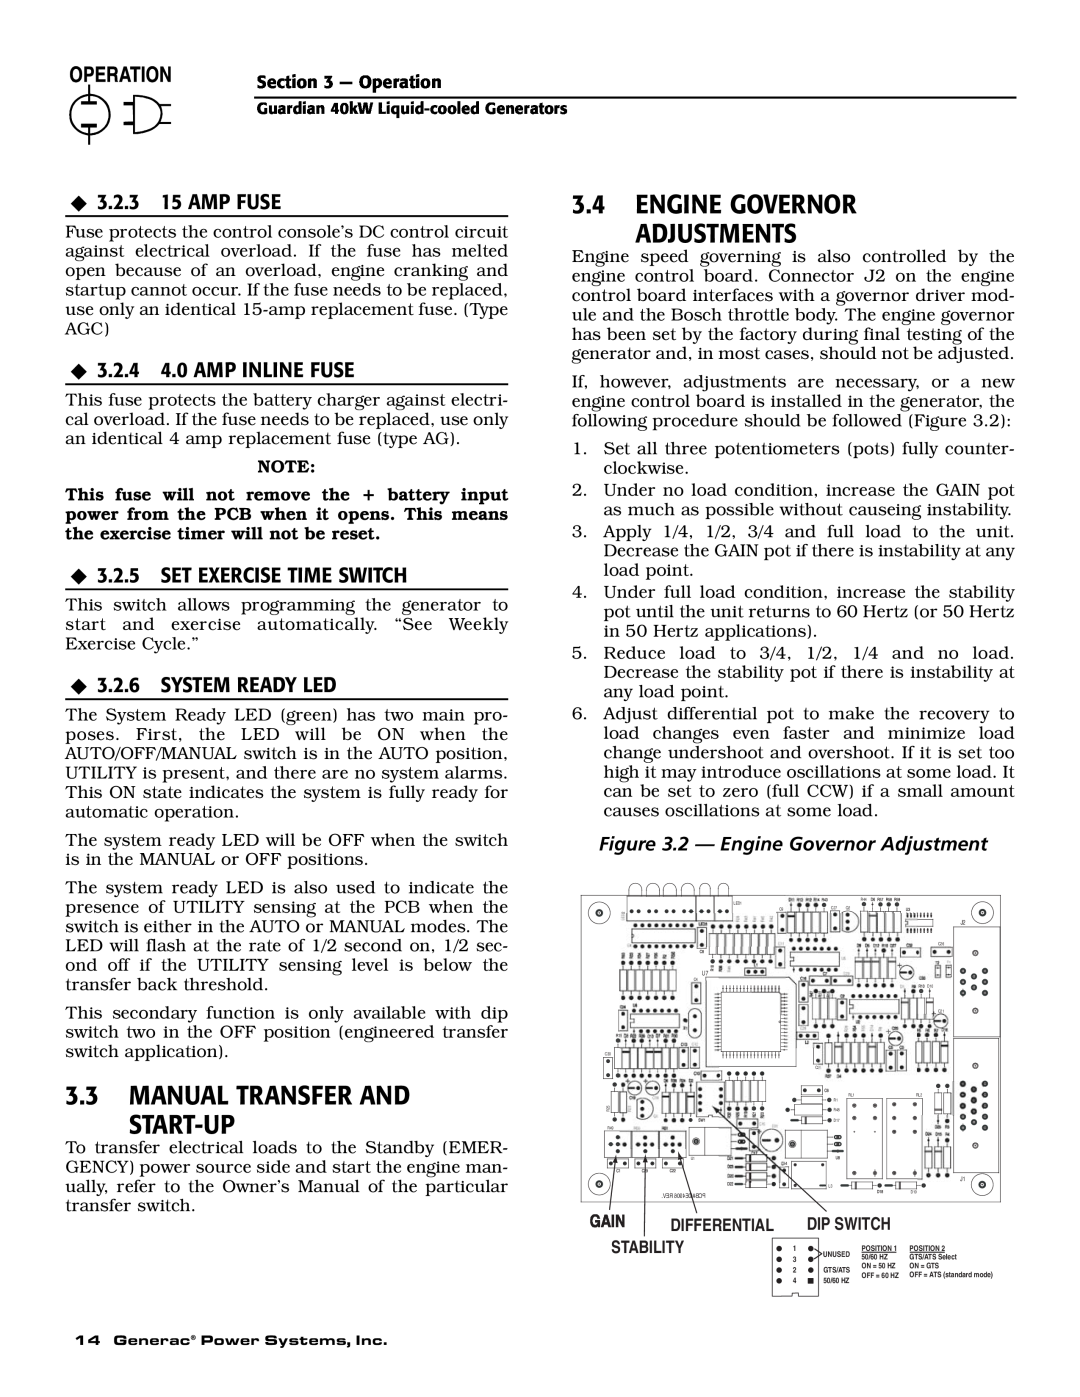 Generac Power Systems 004992-0, 004992-1 3.4ENGINE GOVERNOR ADJUSTMENTS, 3.3MANUAL TRANSFER AND START-UP, Dip Switch 